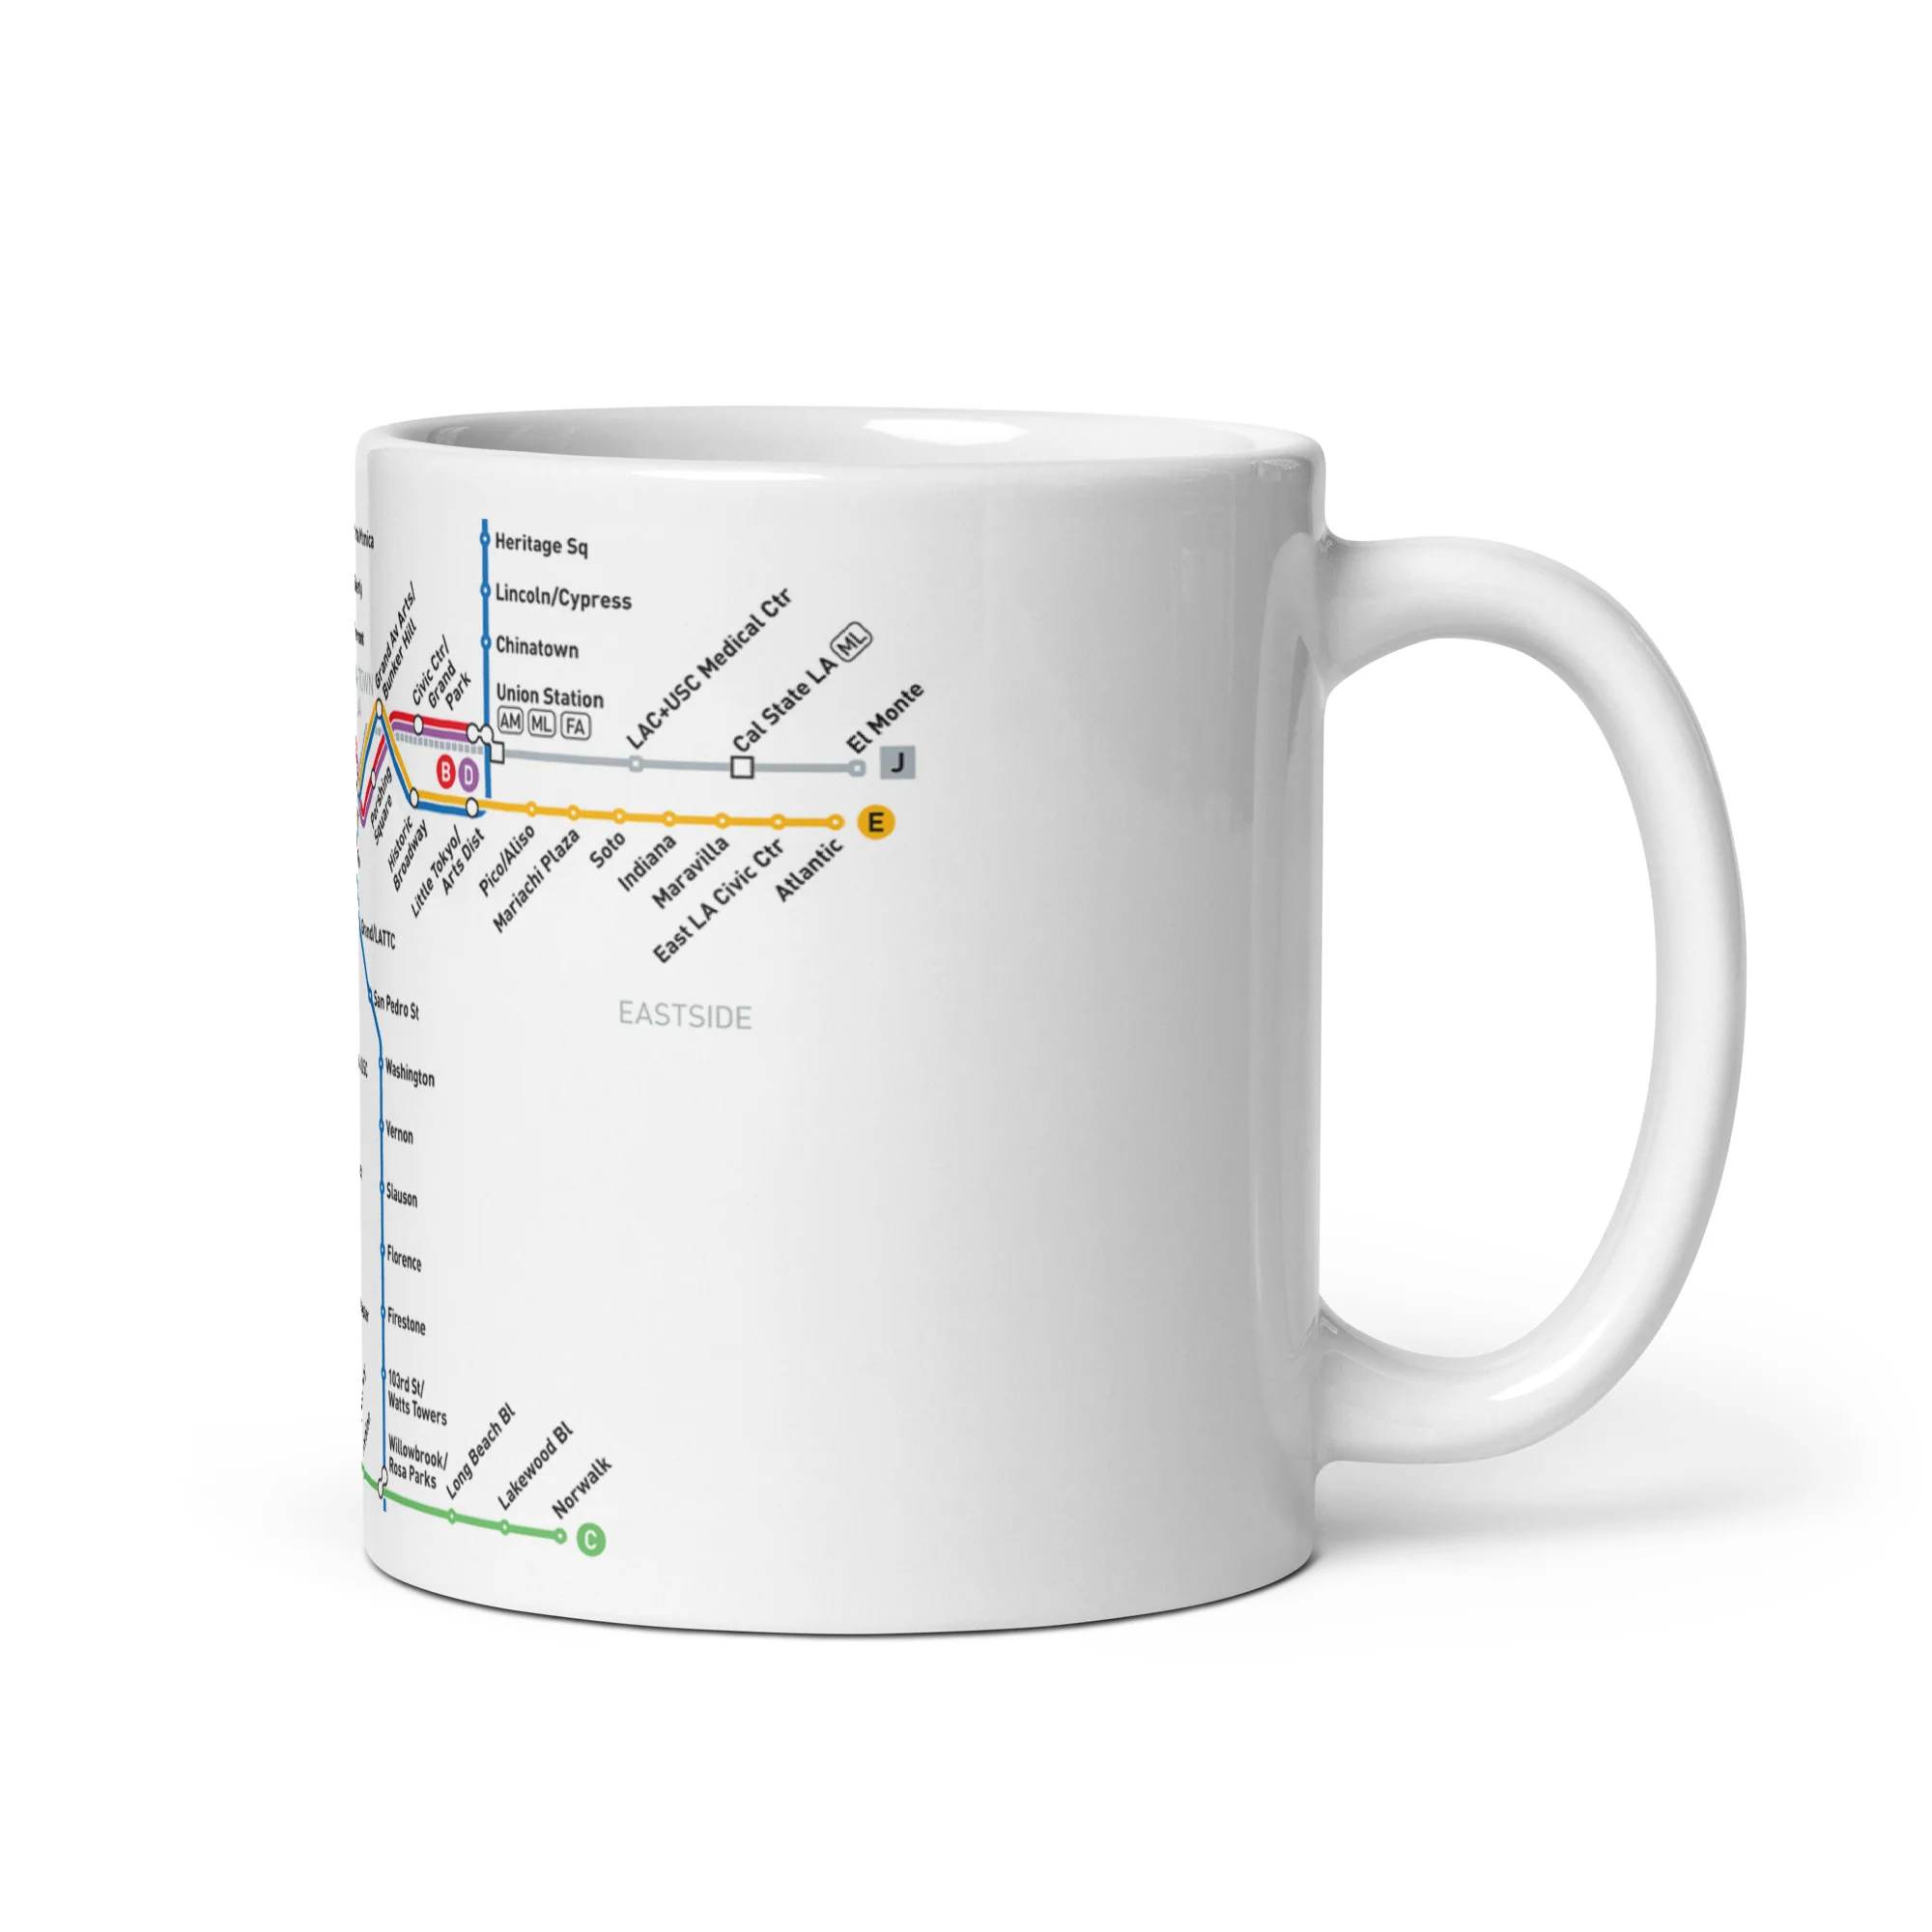 An image of a white mug with an illustration of a Los Angeles Metro light rail map.